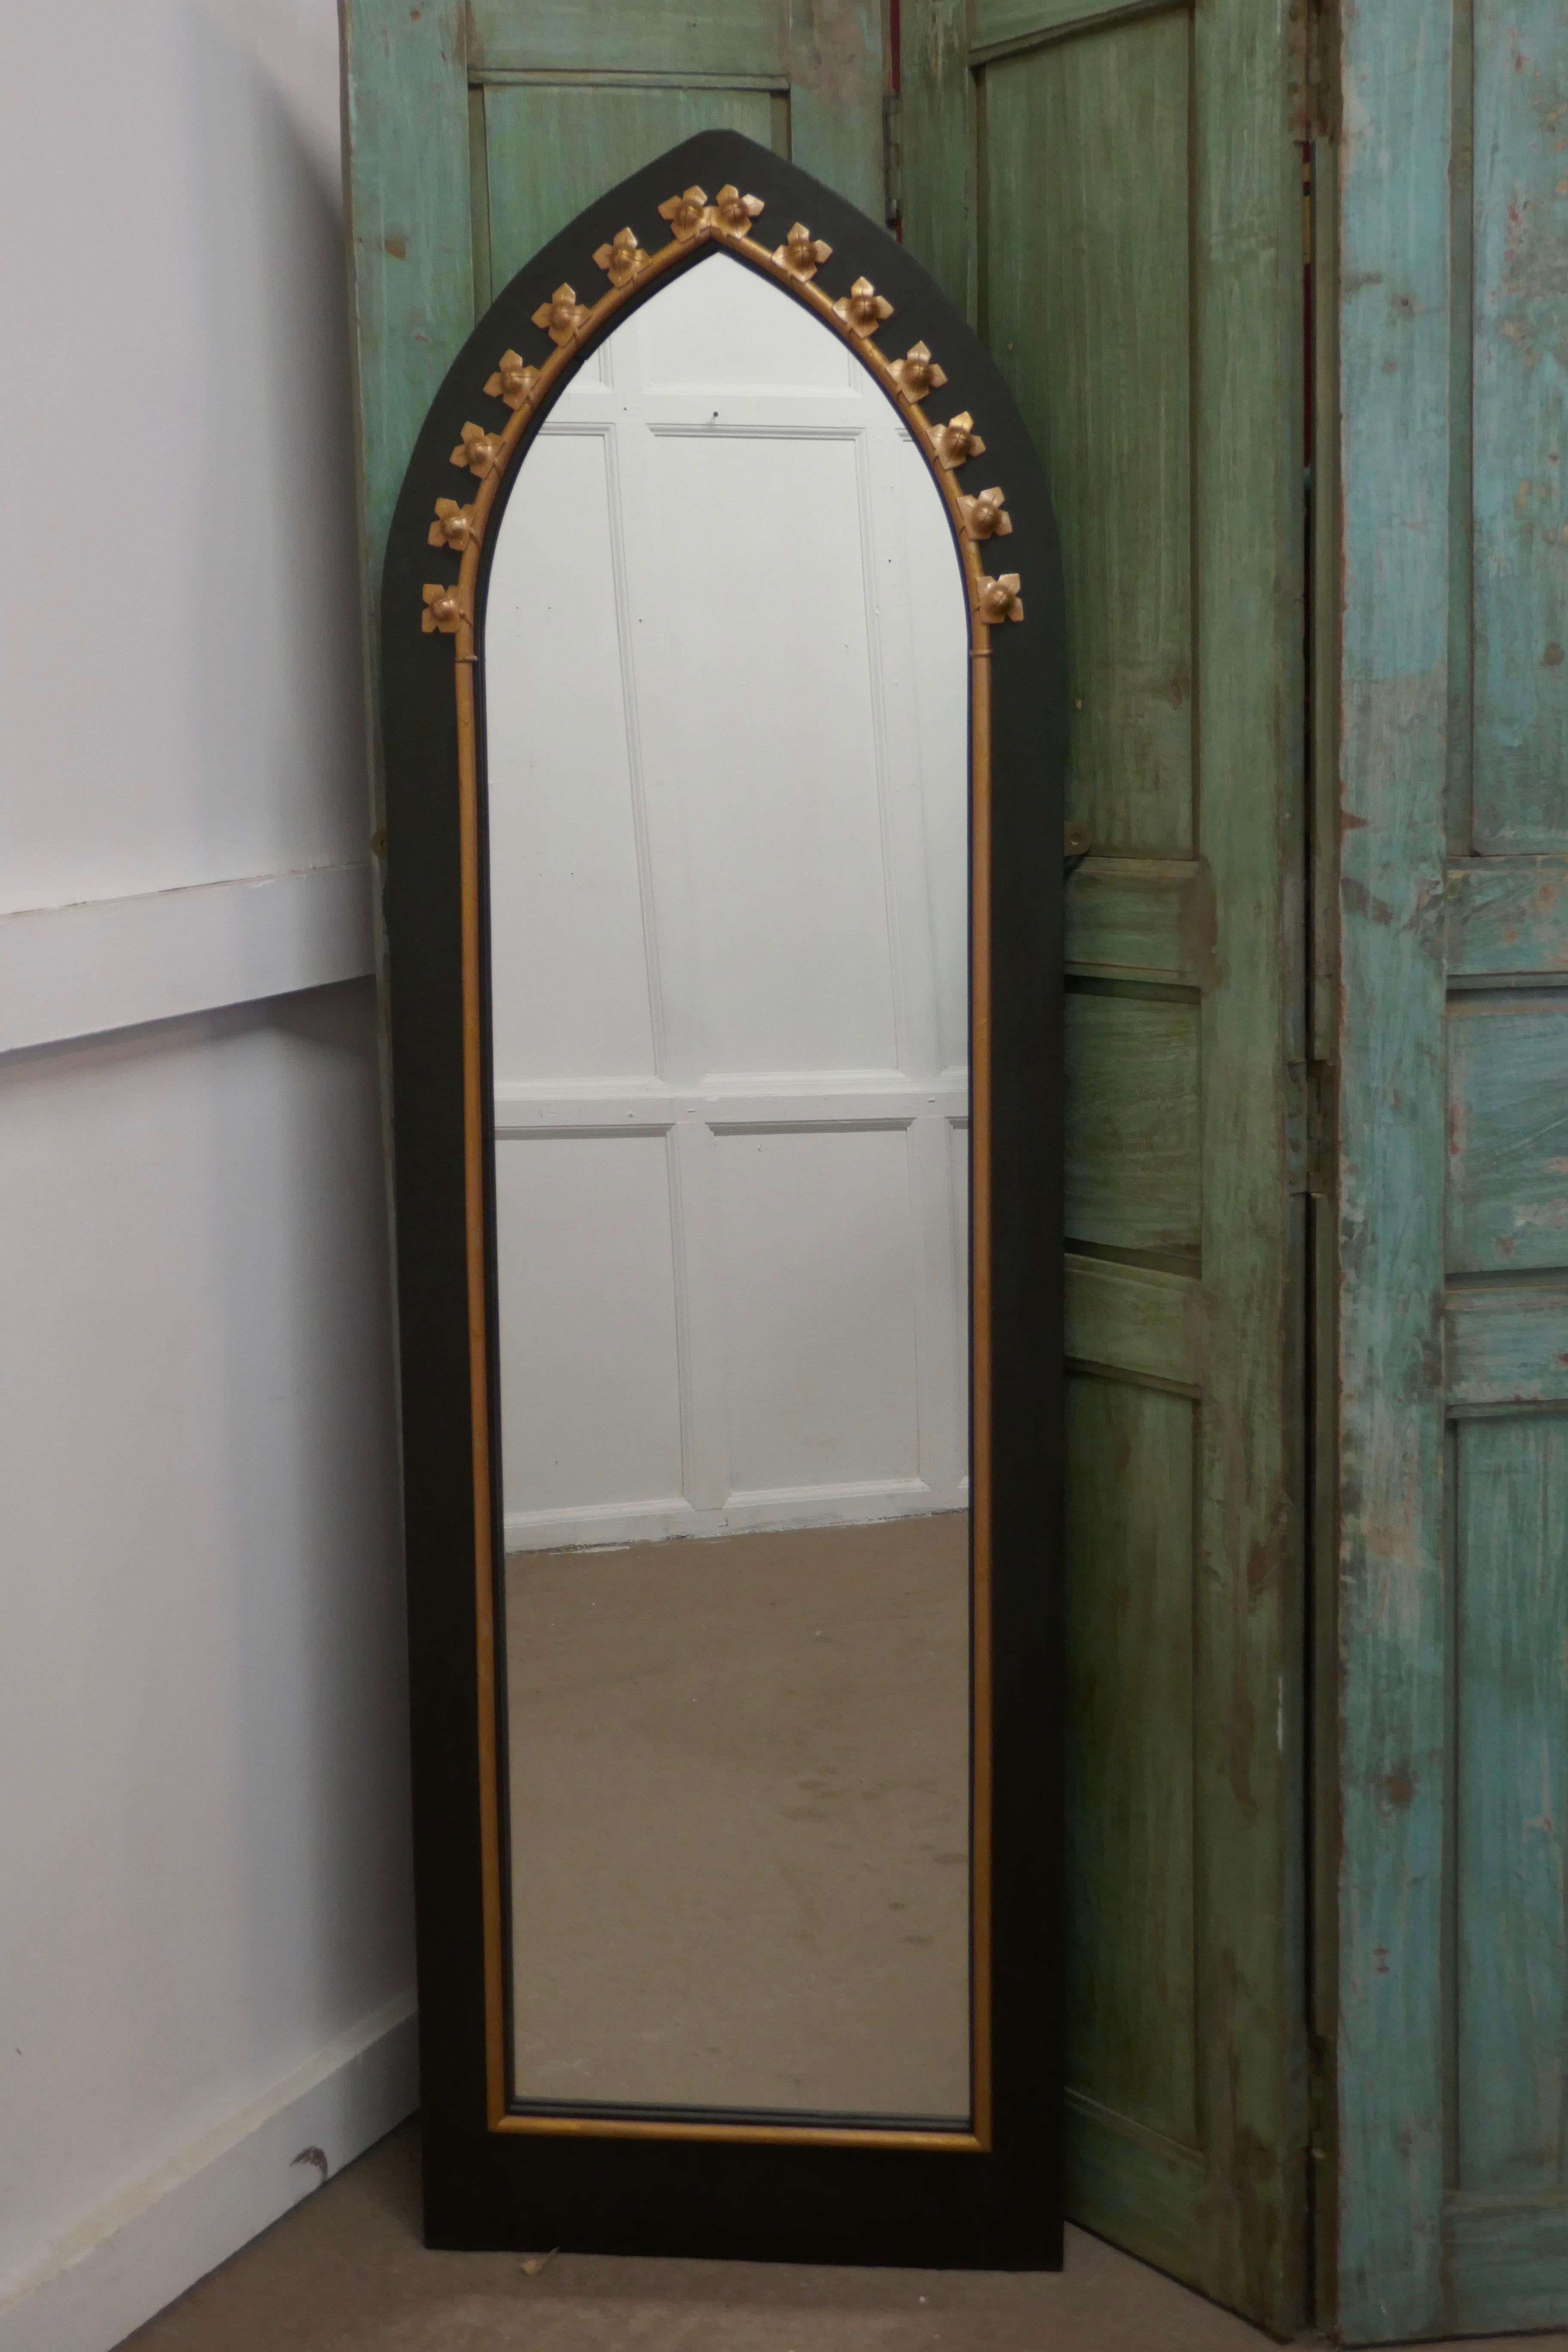 Gothic Revival Tall Console Mirror, with an Arts & Crafts Gothic Frame